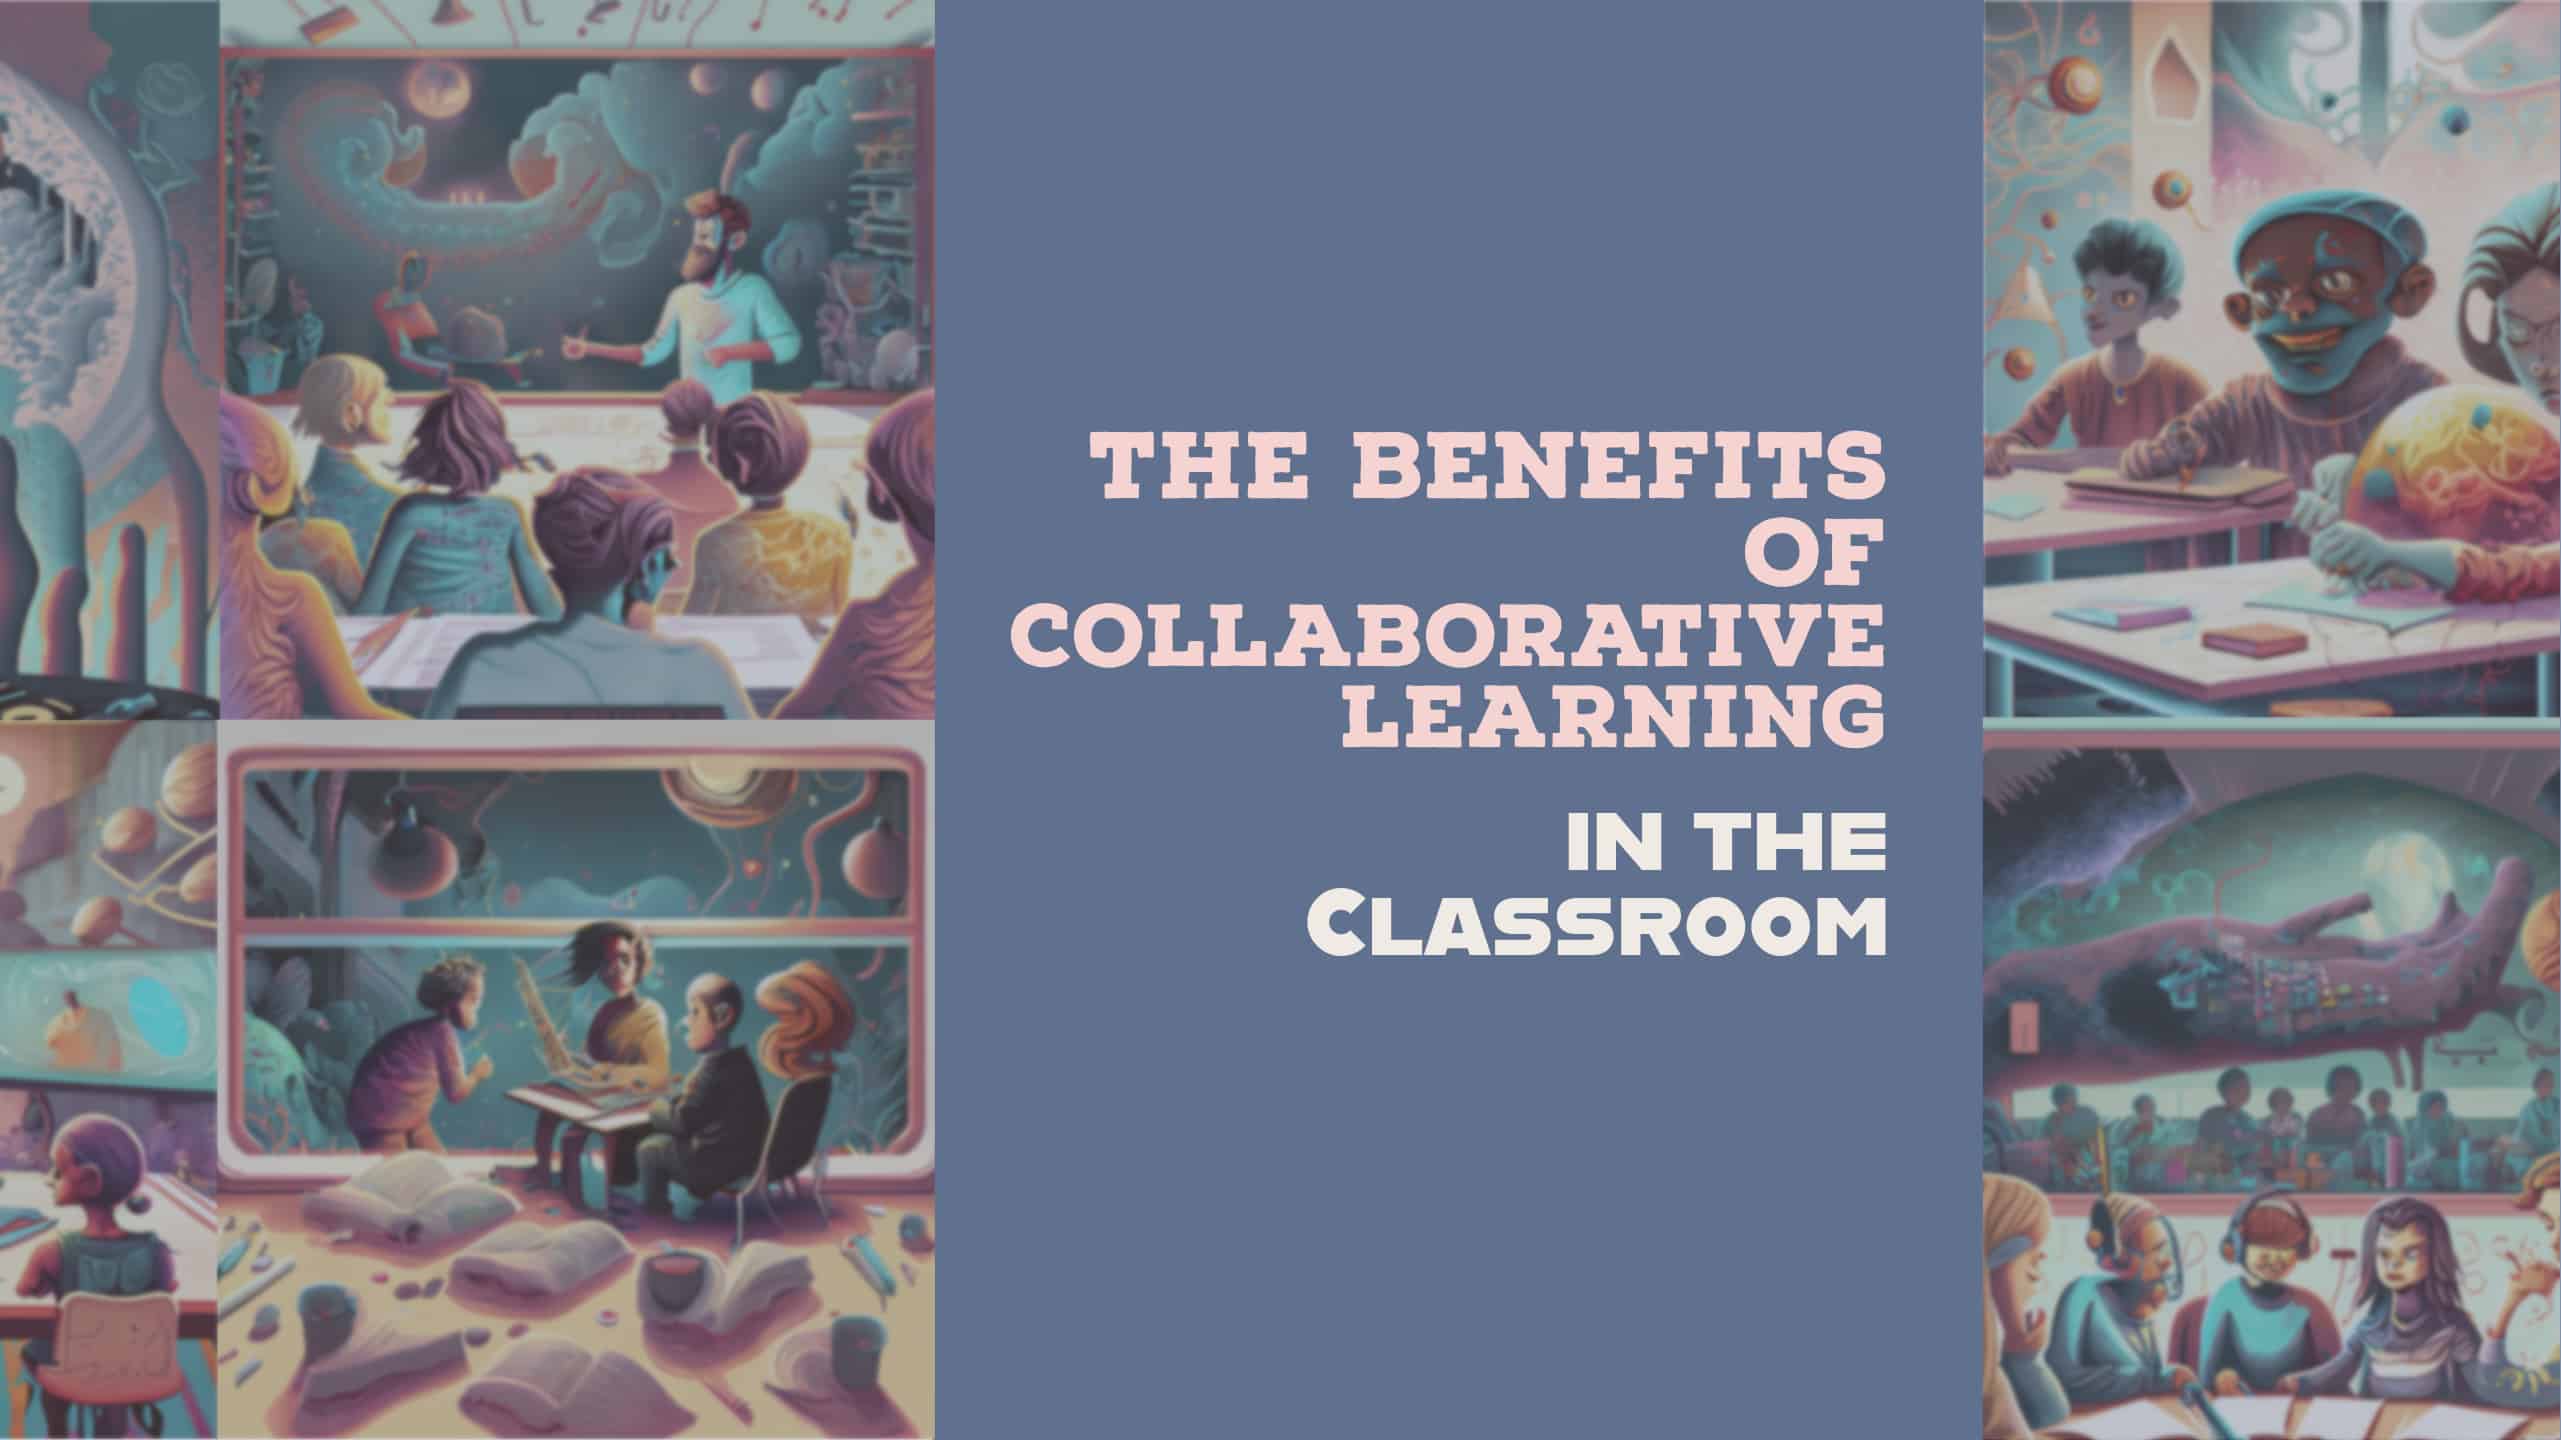 The Benefits of Collaborative Learning in the Classroom